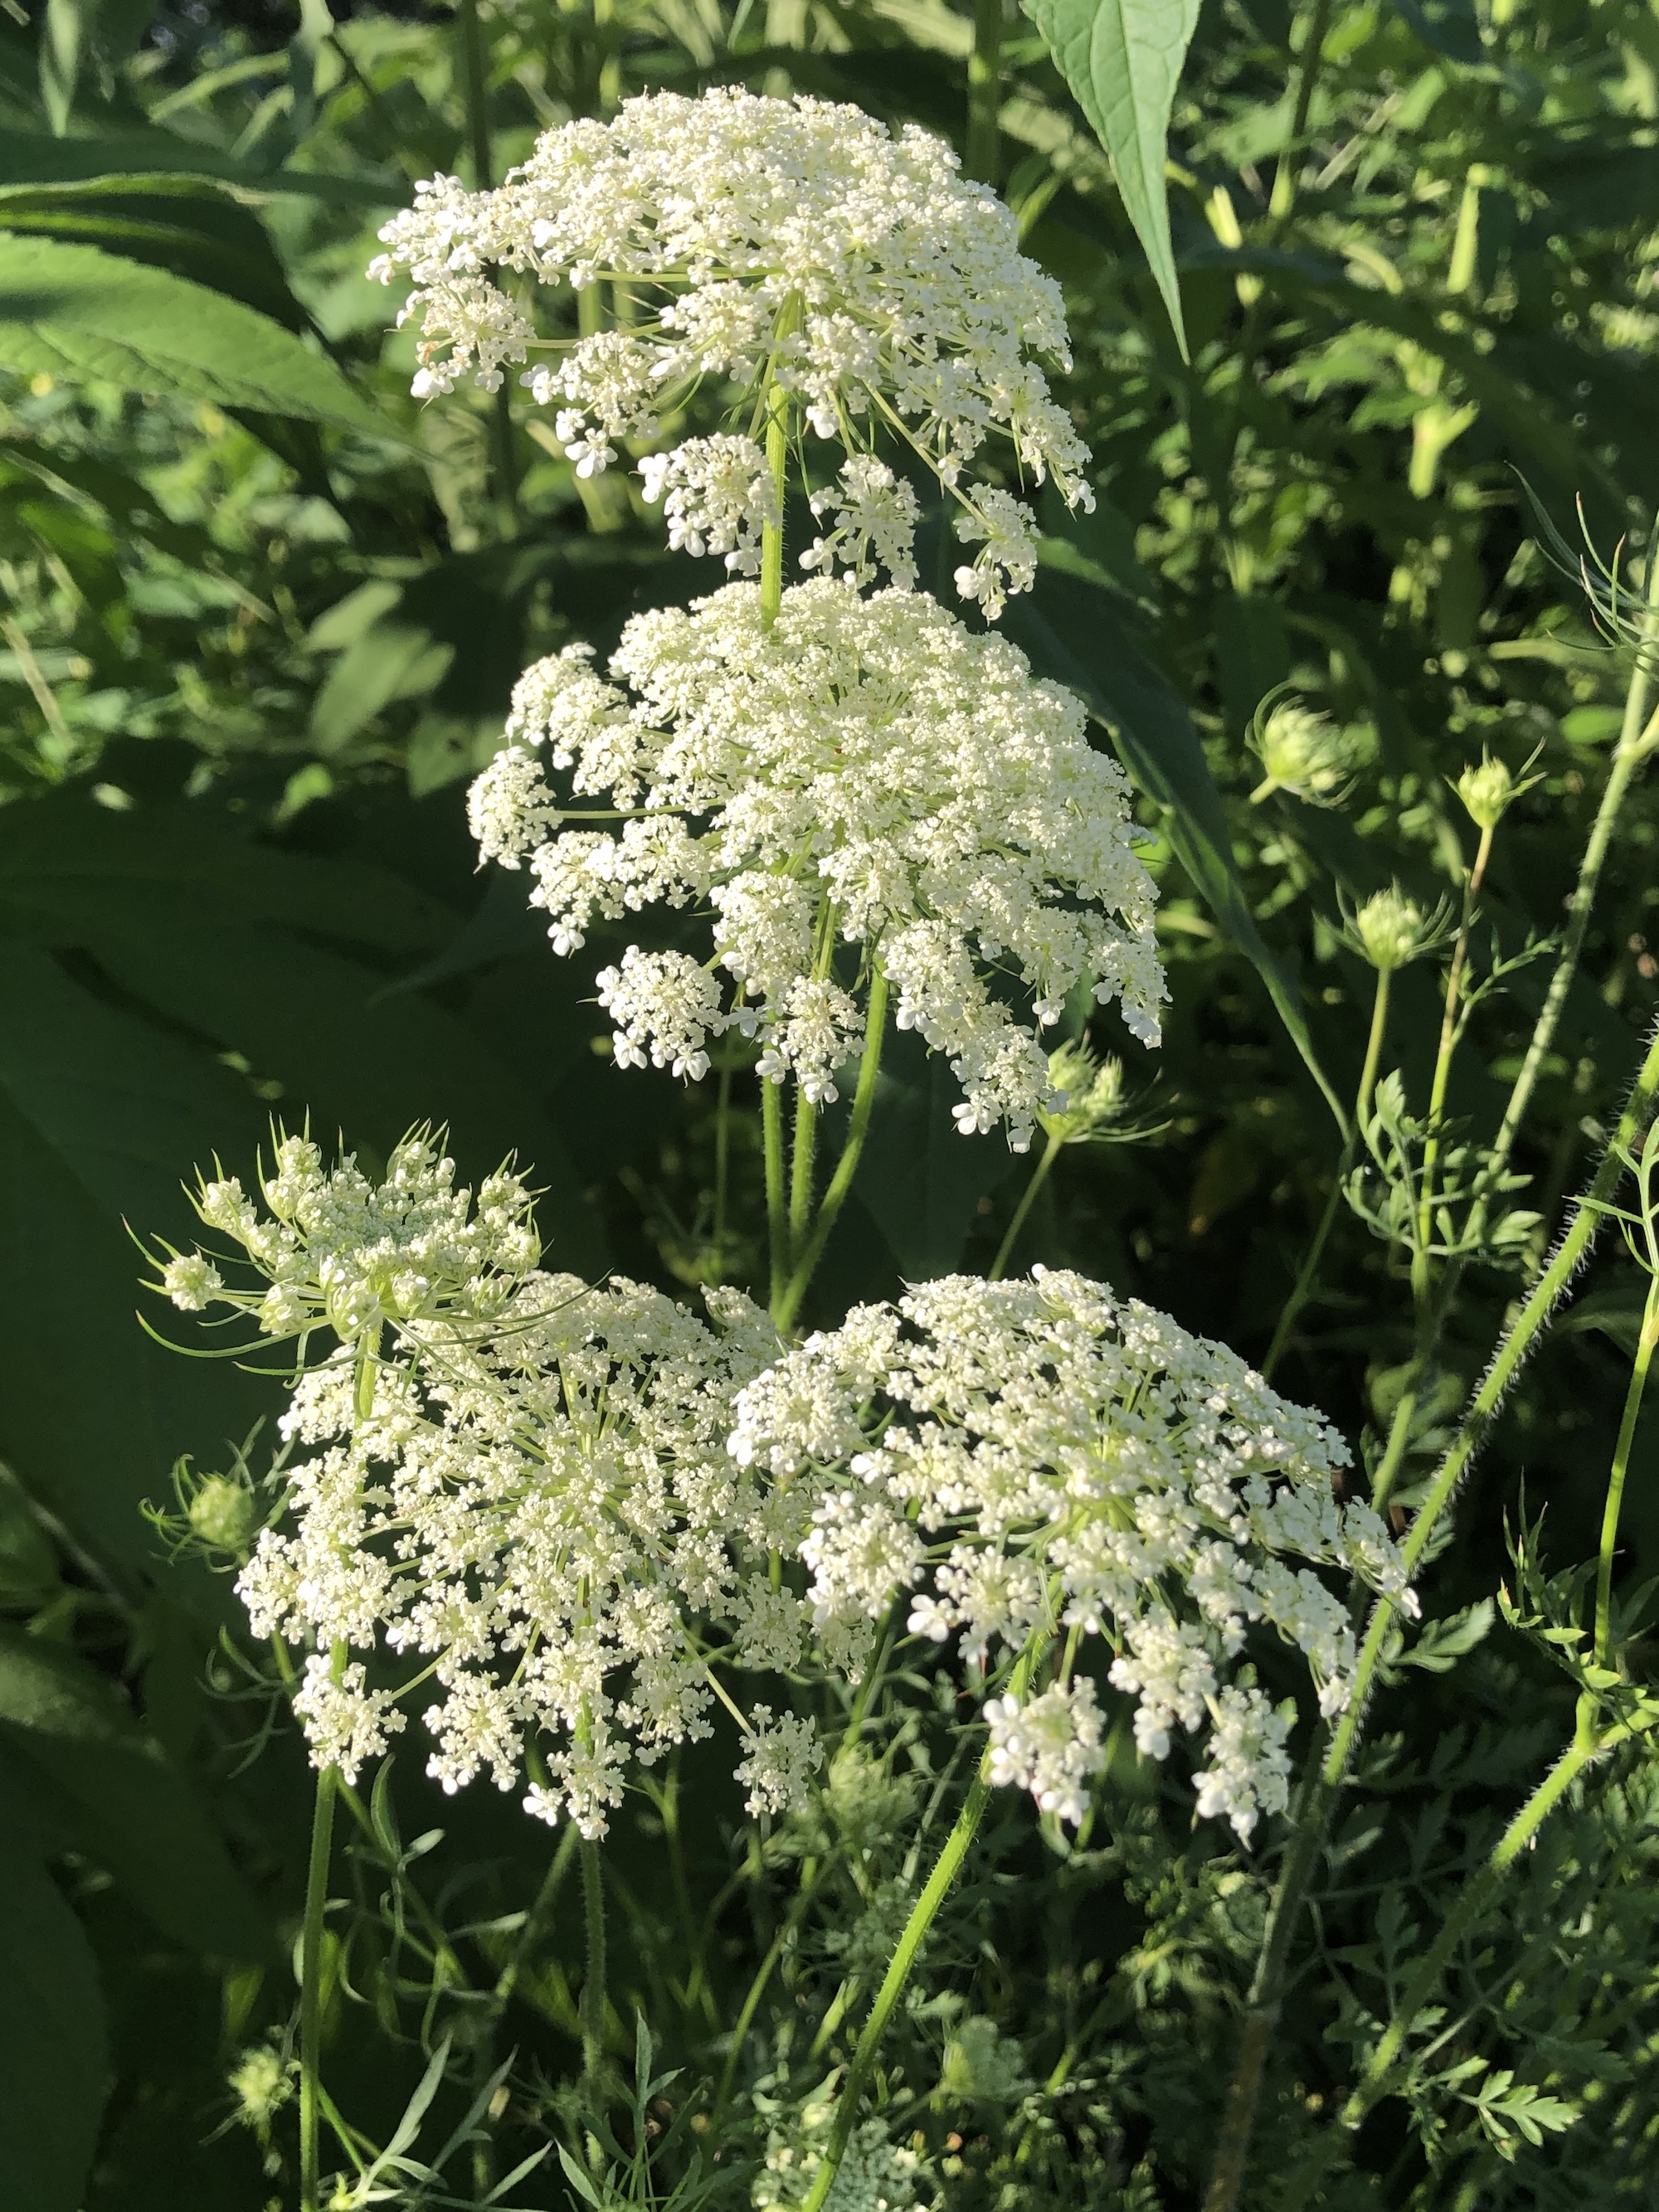 Queen Anne's Lace on bank of retaining pond on the corner of Nakoma Road and Manitou Way on July 19, 2020.